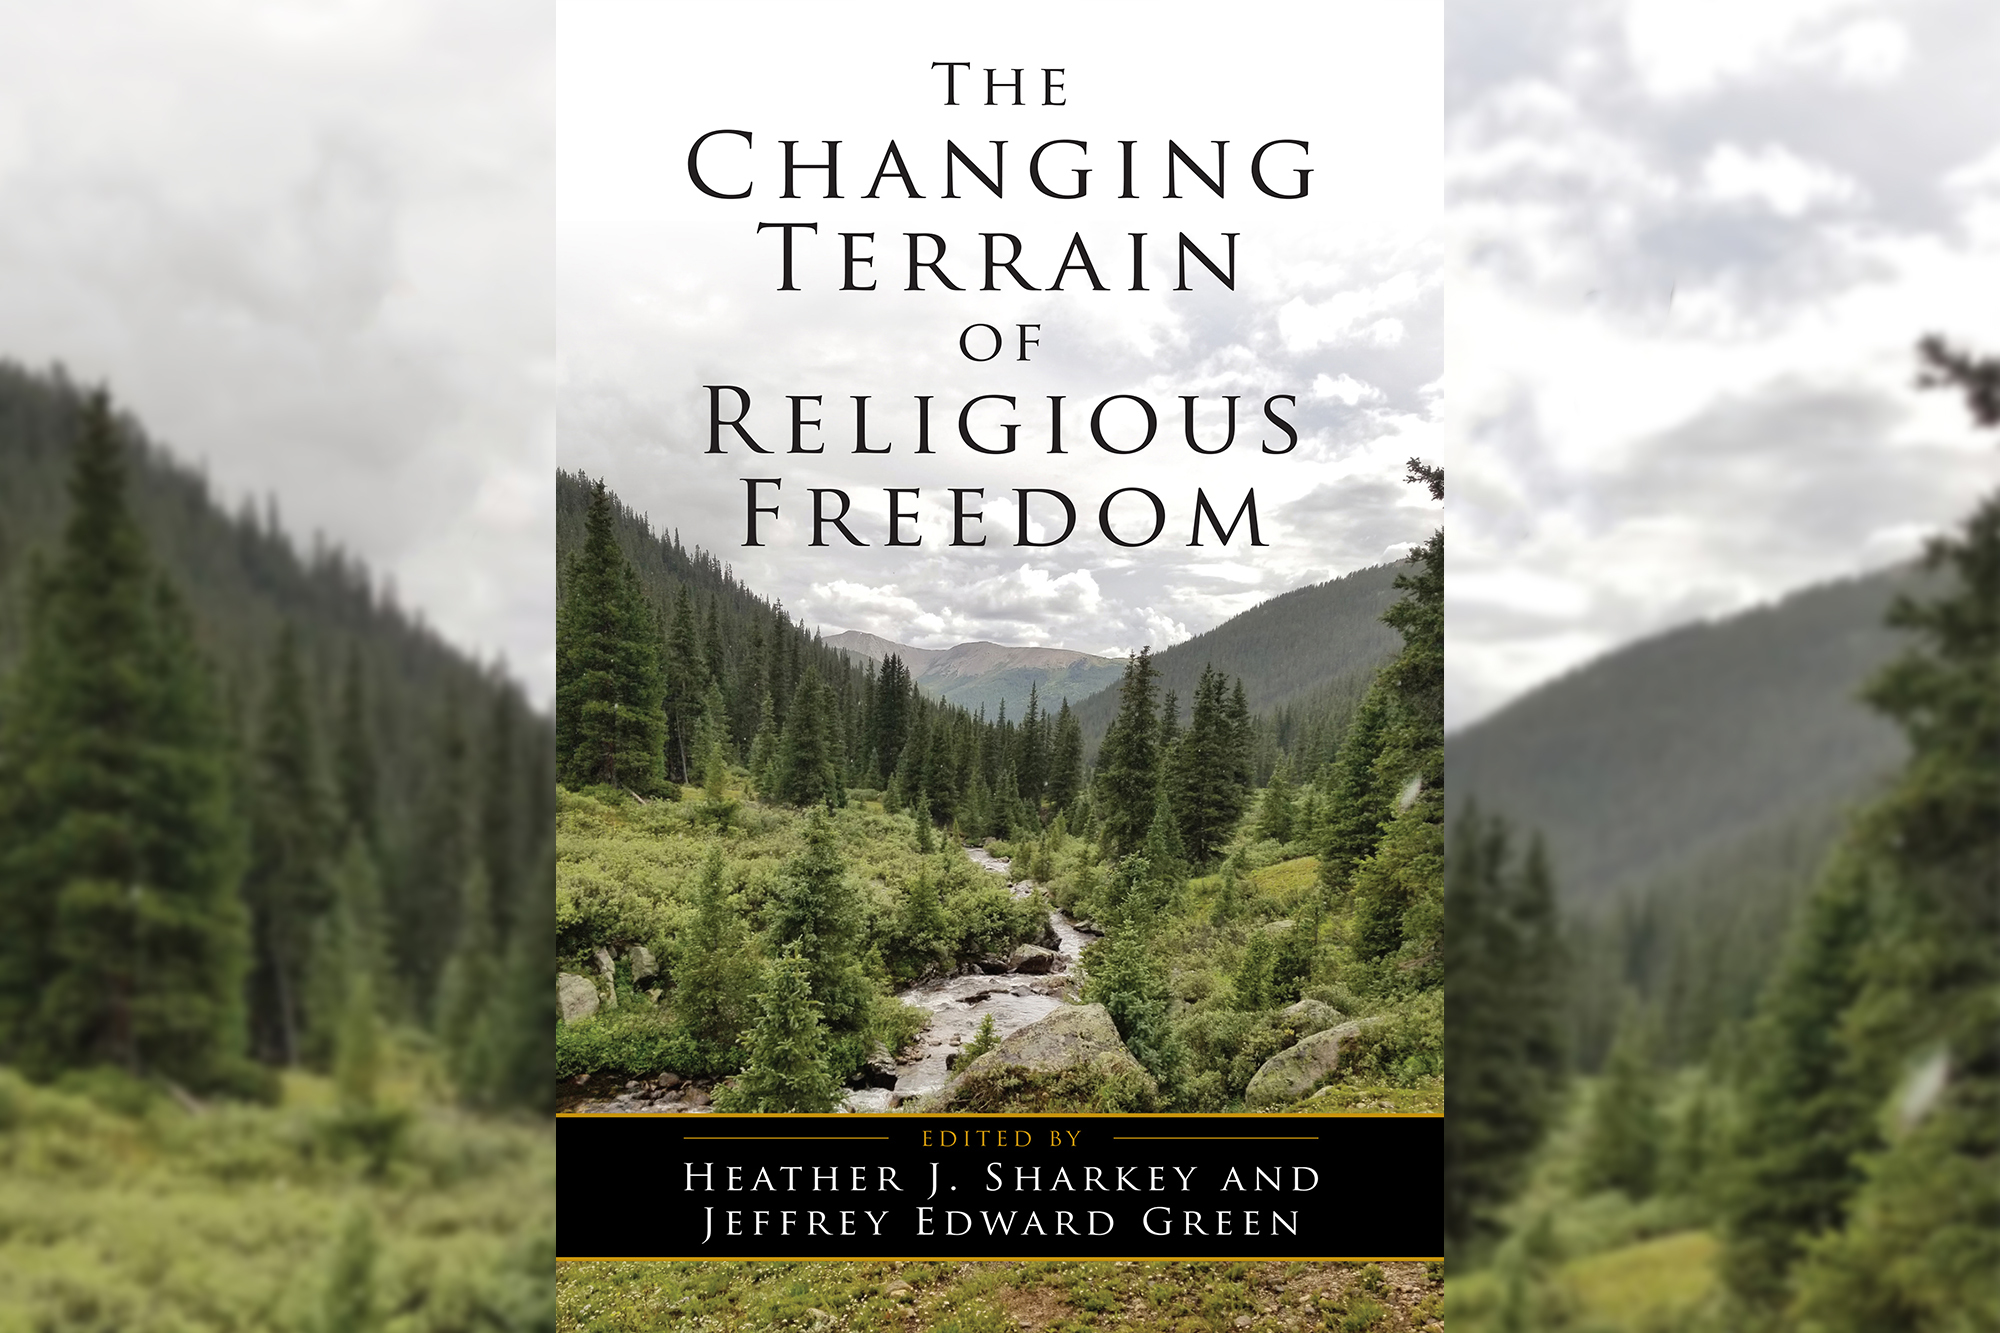 Cover for the jacket of book called "The Changing Terrain of Religious Freedom" shows a Colorado mountain scene with pines and a river with hills in the distance